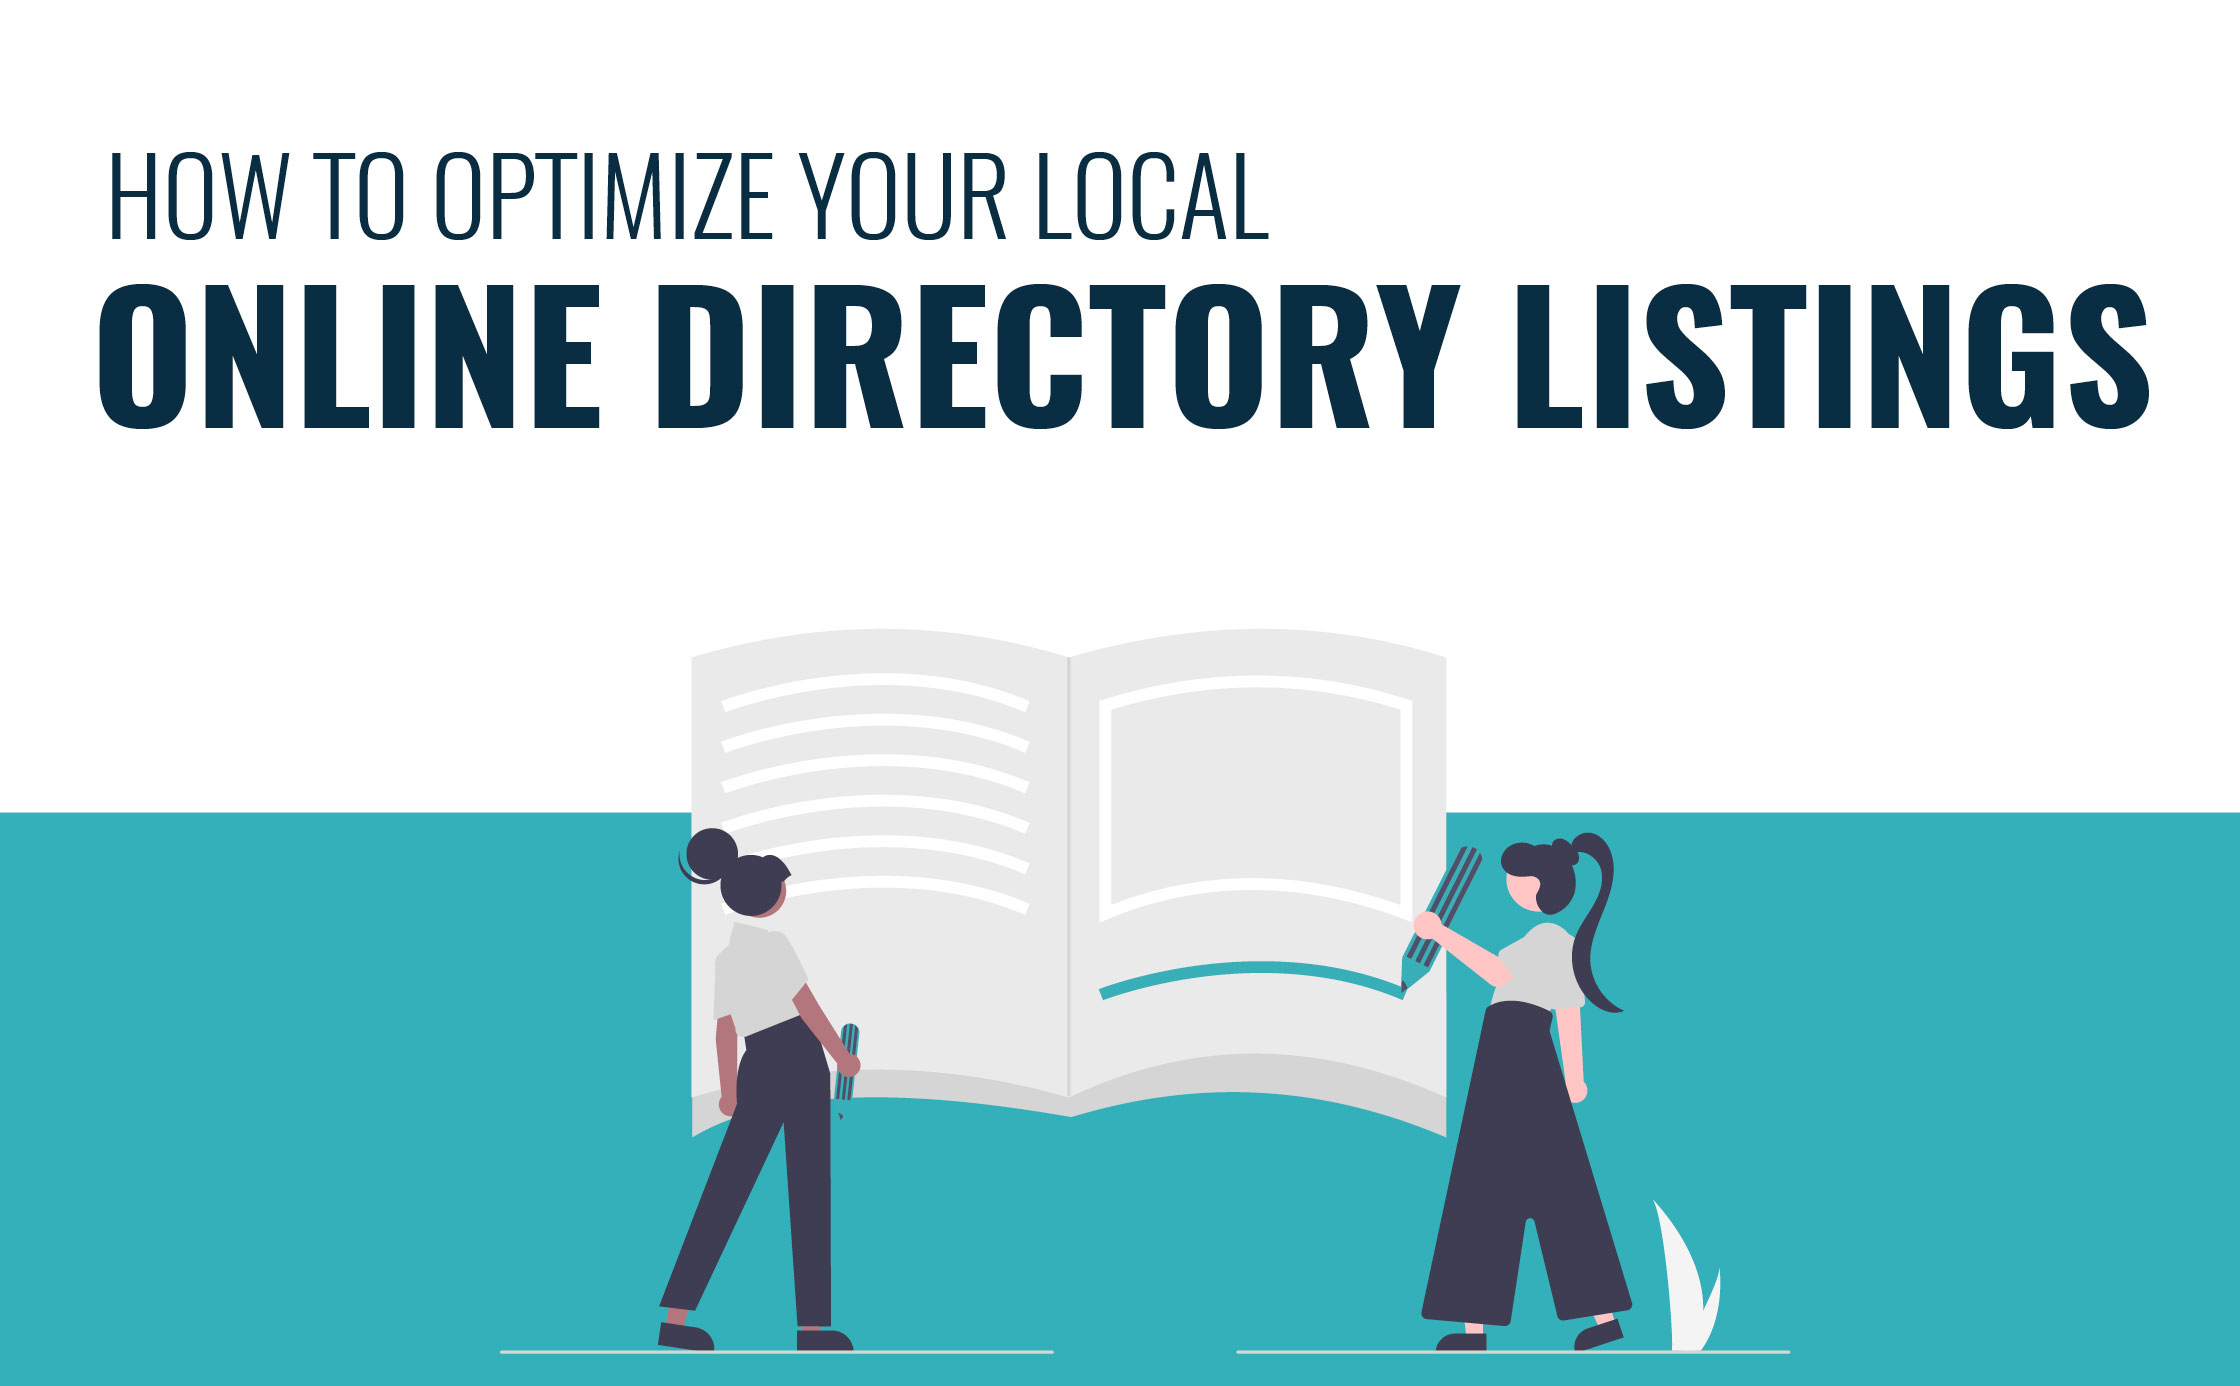 Blog - How to Optimize Your Directory Listings for Maximum Visibility